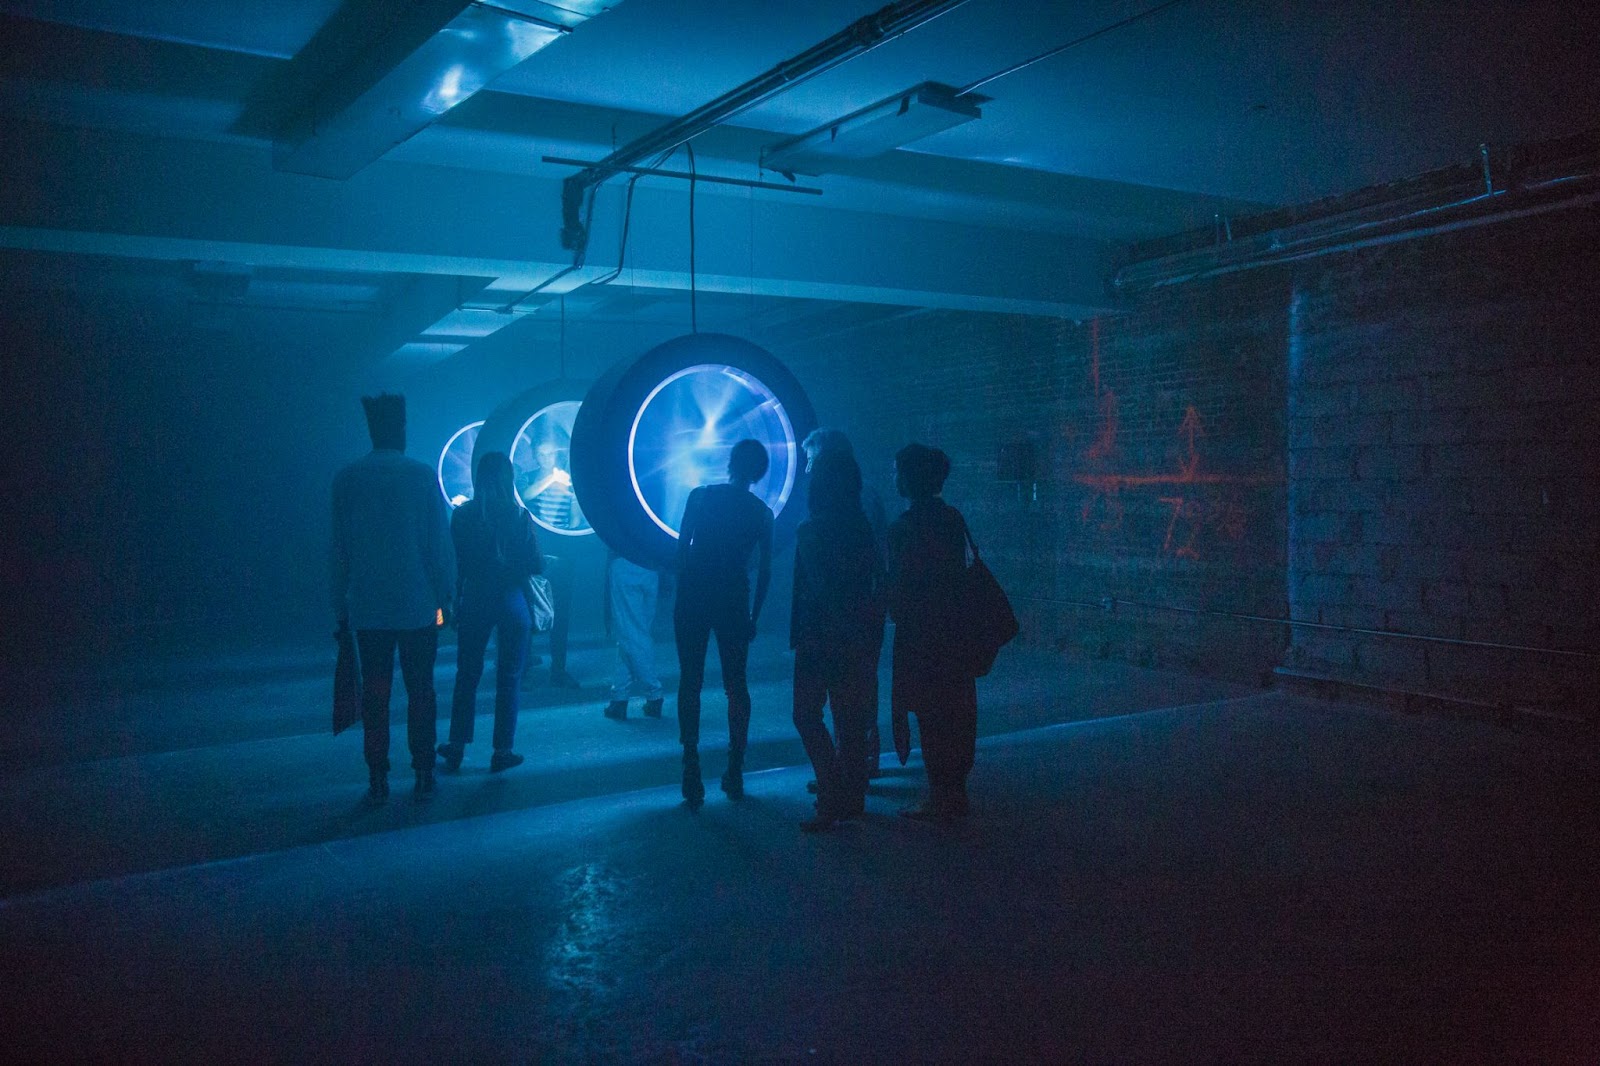 A photo of a gallery space with people standing around a blue circular light installation